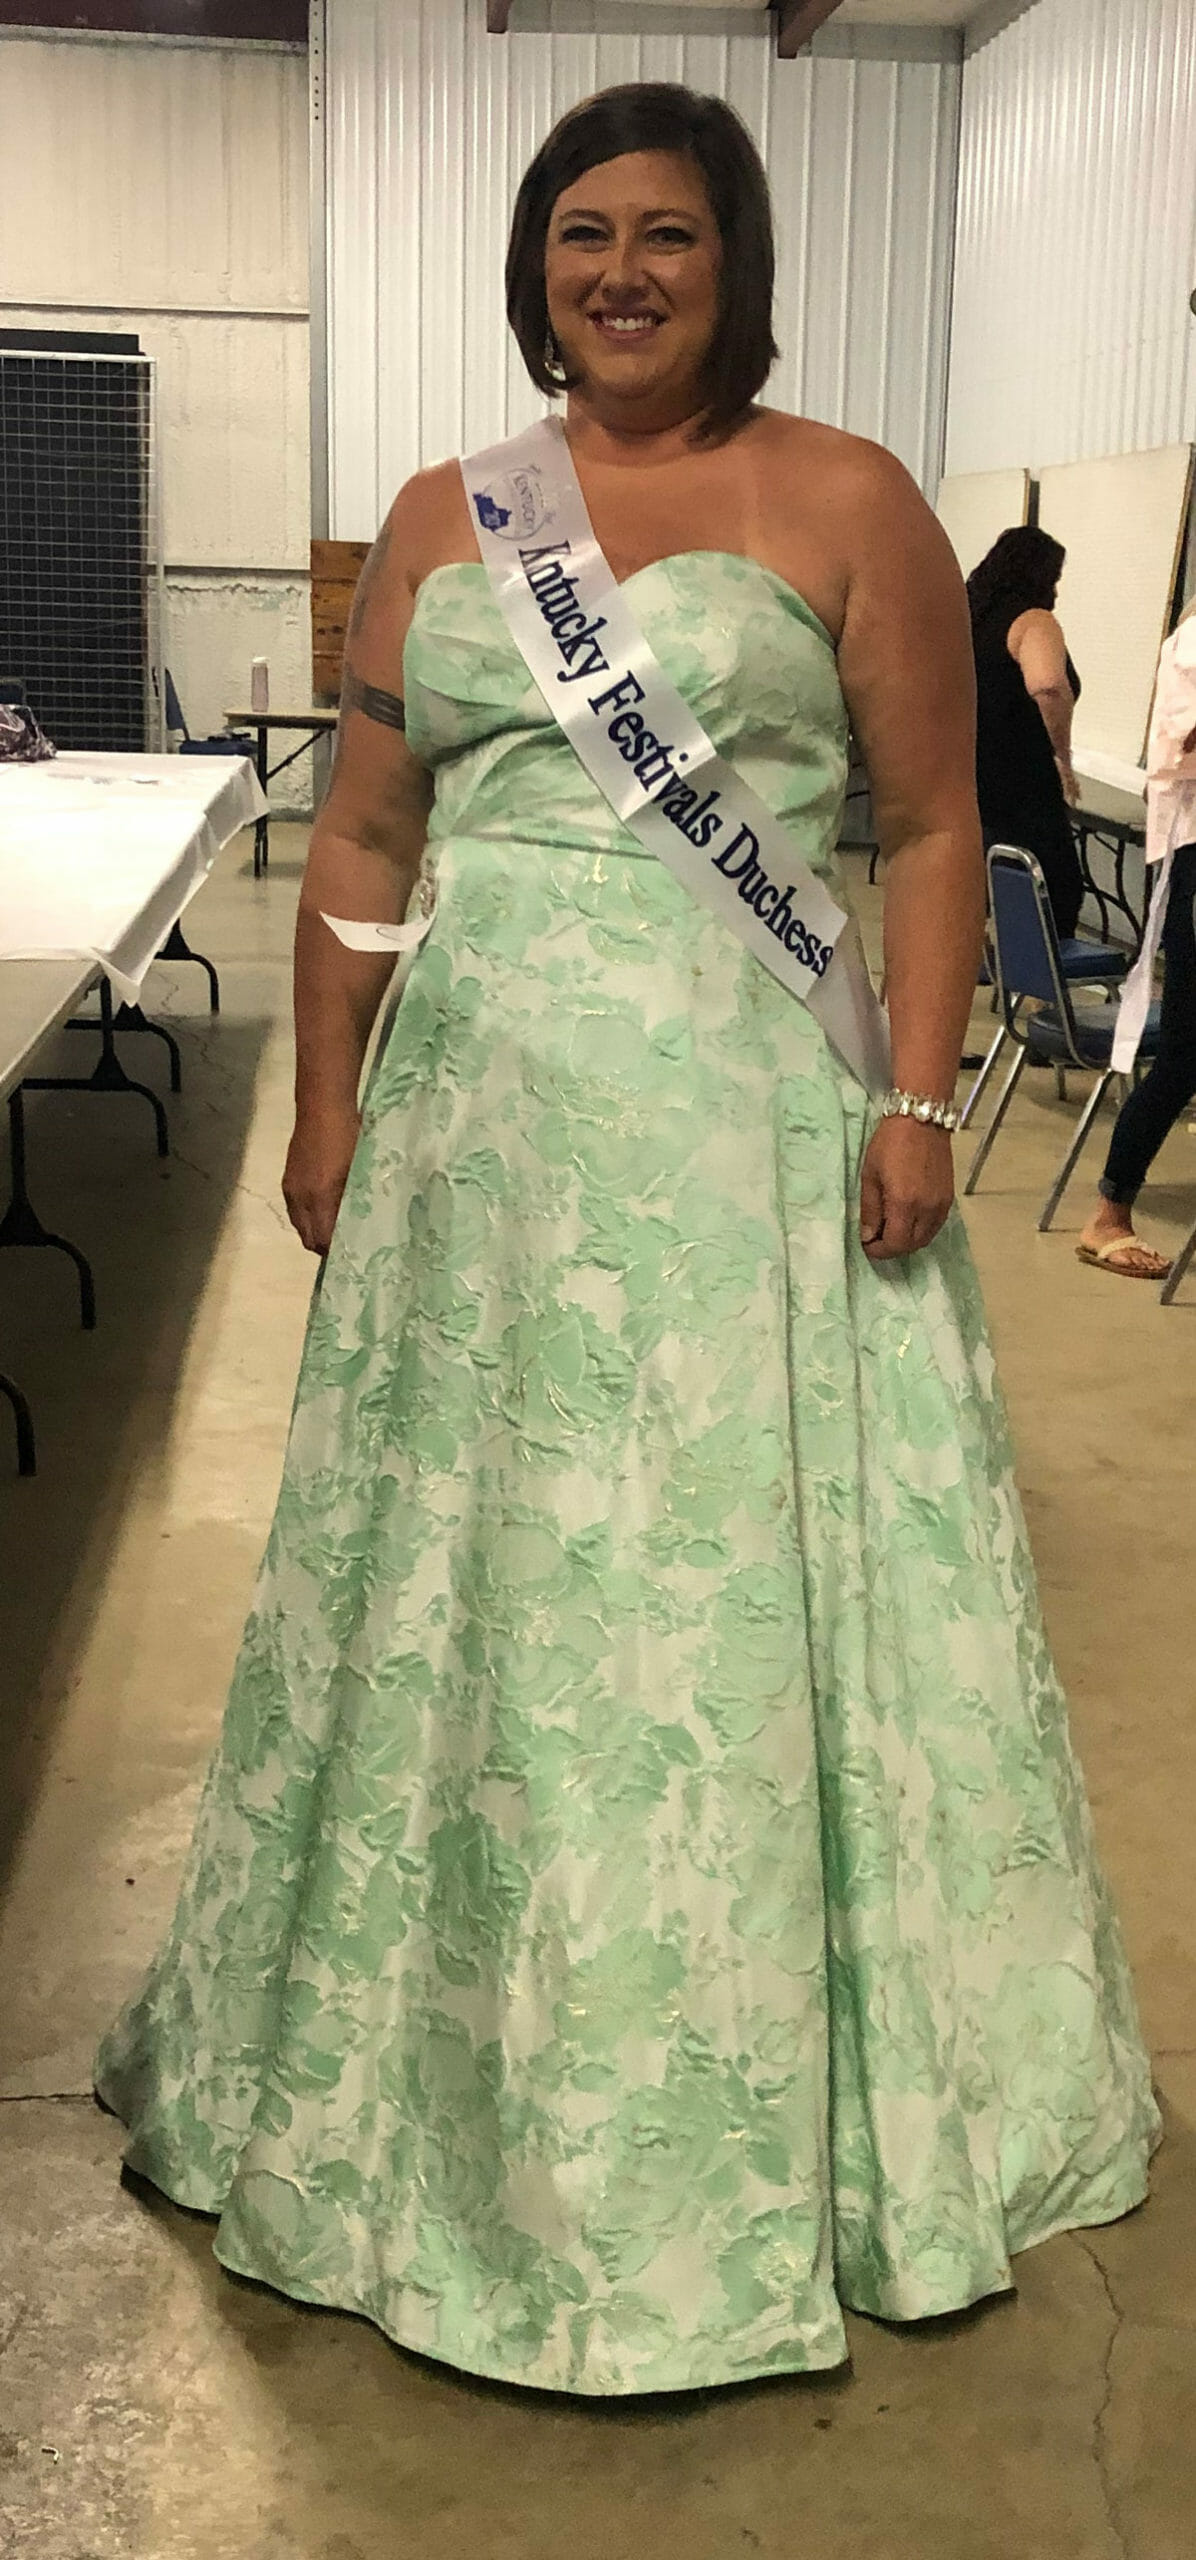 How Beauty Pageant Life Has Empowered Me as a Plus-Size Woman